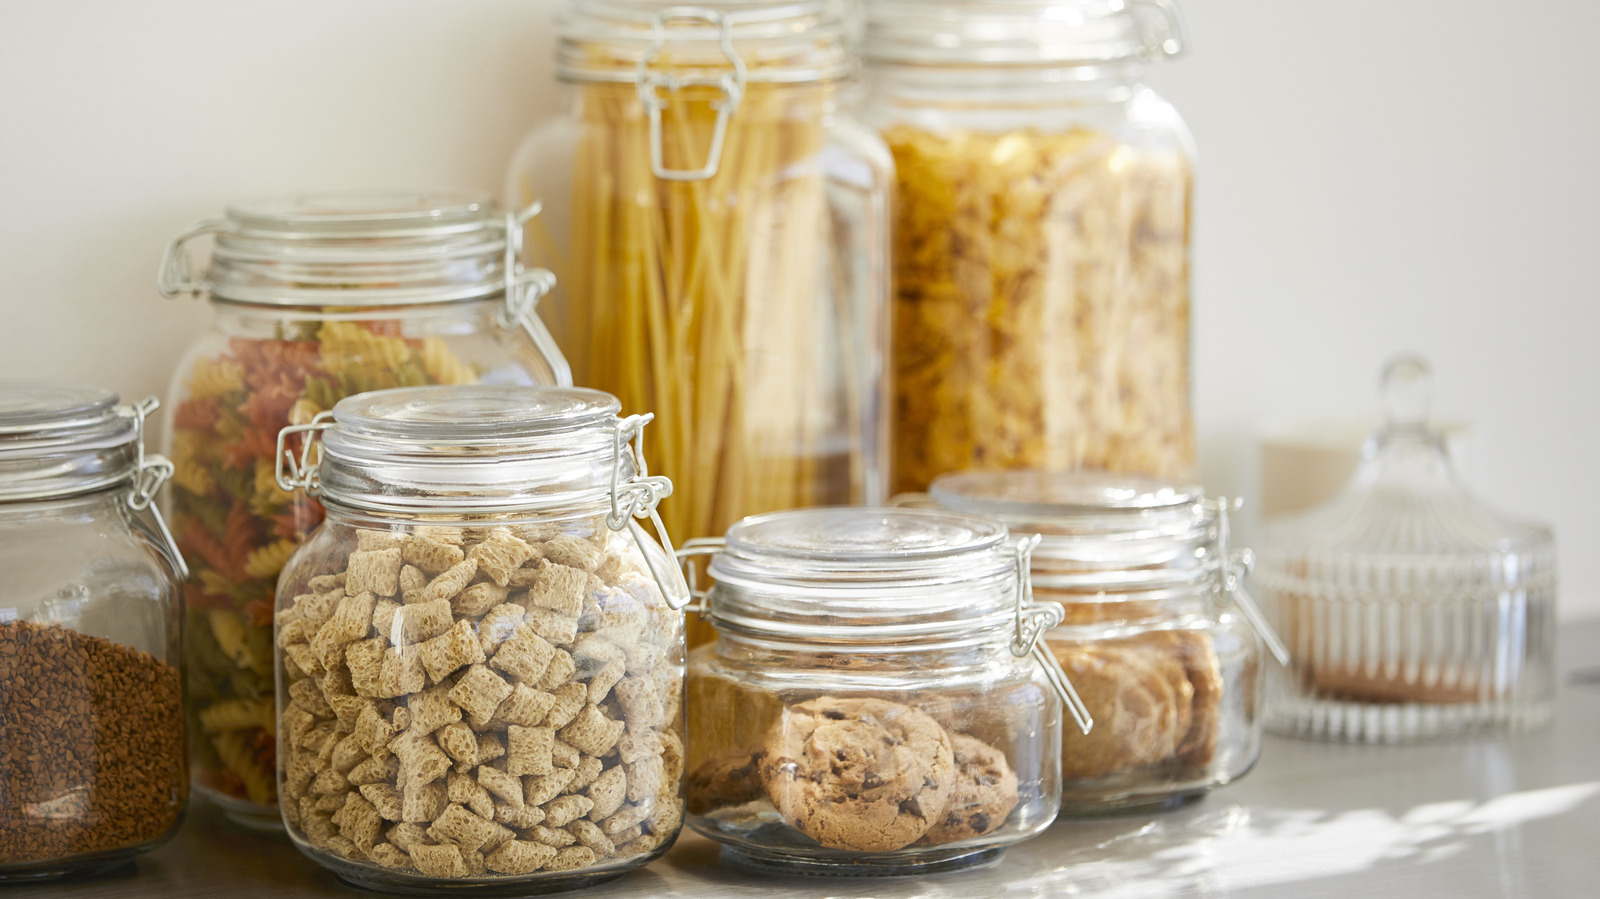 https://www.tastingtable.com/img/gallery/why-it-pays-to-use-clear-containers-for-your-pantry-storage/l-intro-1684418482.jpg